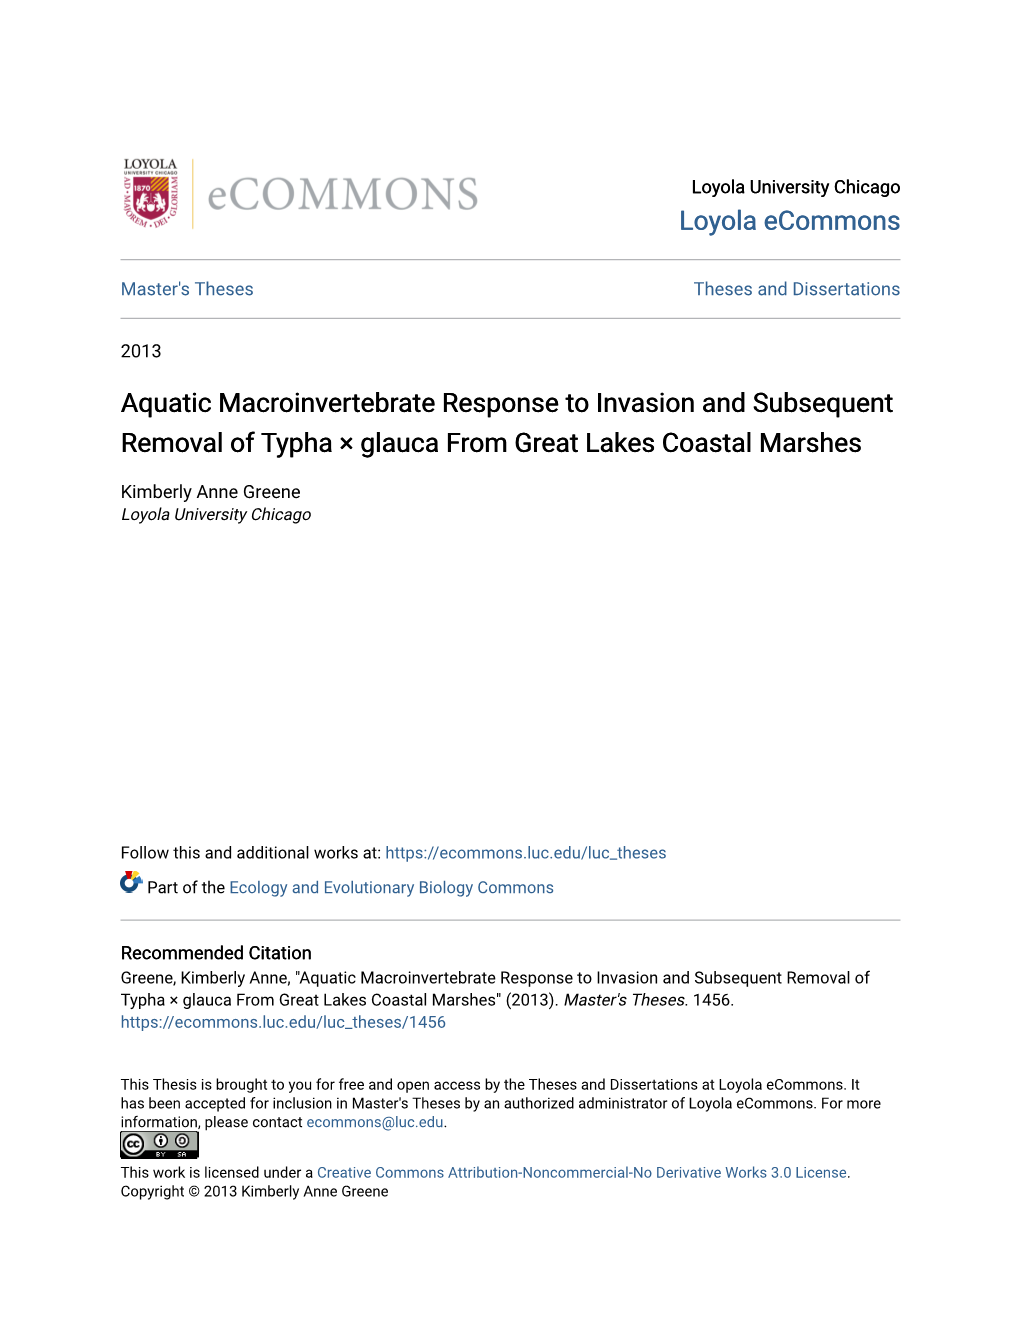 Aquatic Macroinvertebrate Response to Invasion and Subsequent Removal of Typha × Glauca from Great Lakes Coastal Marshes